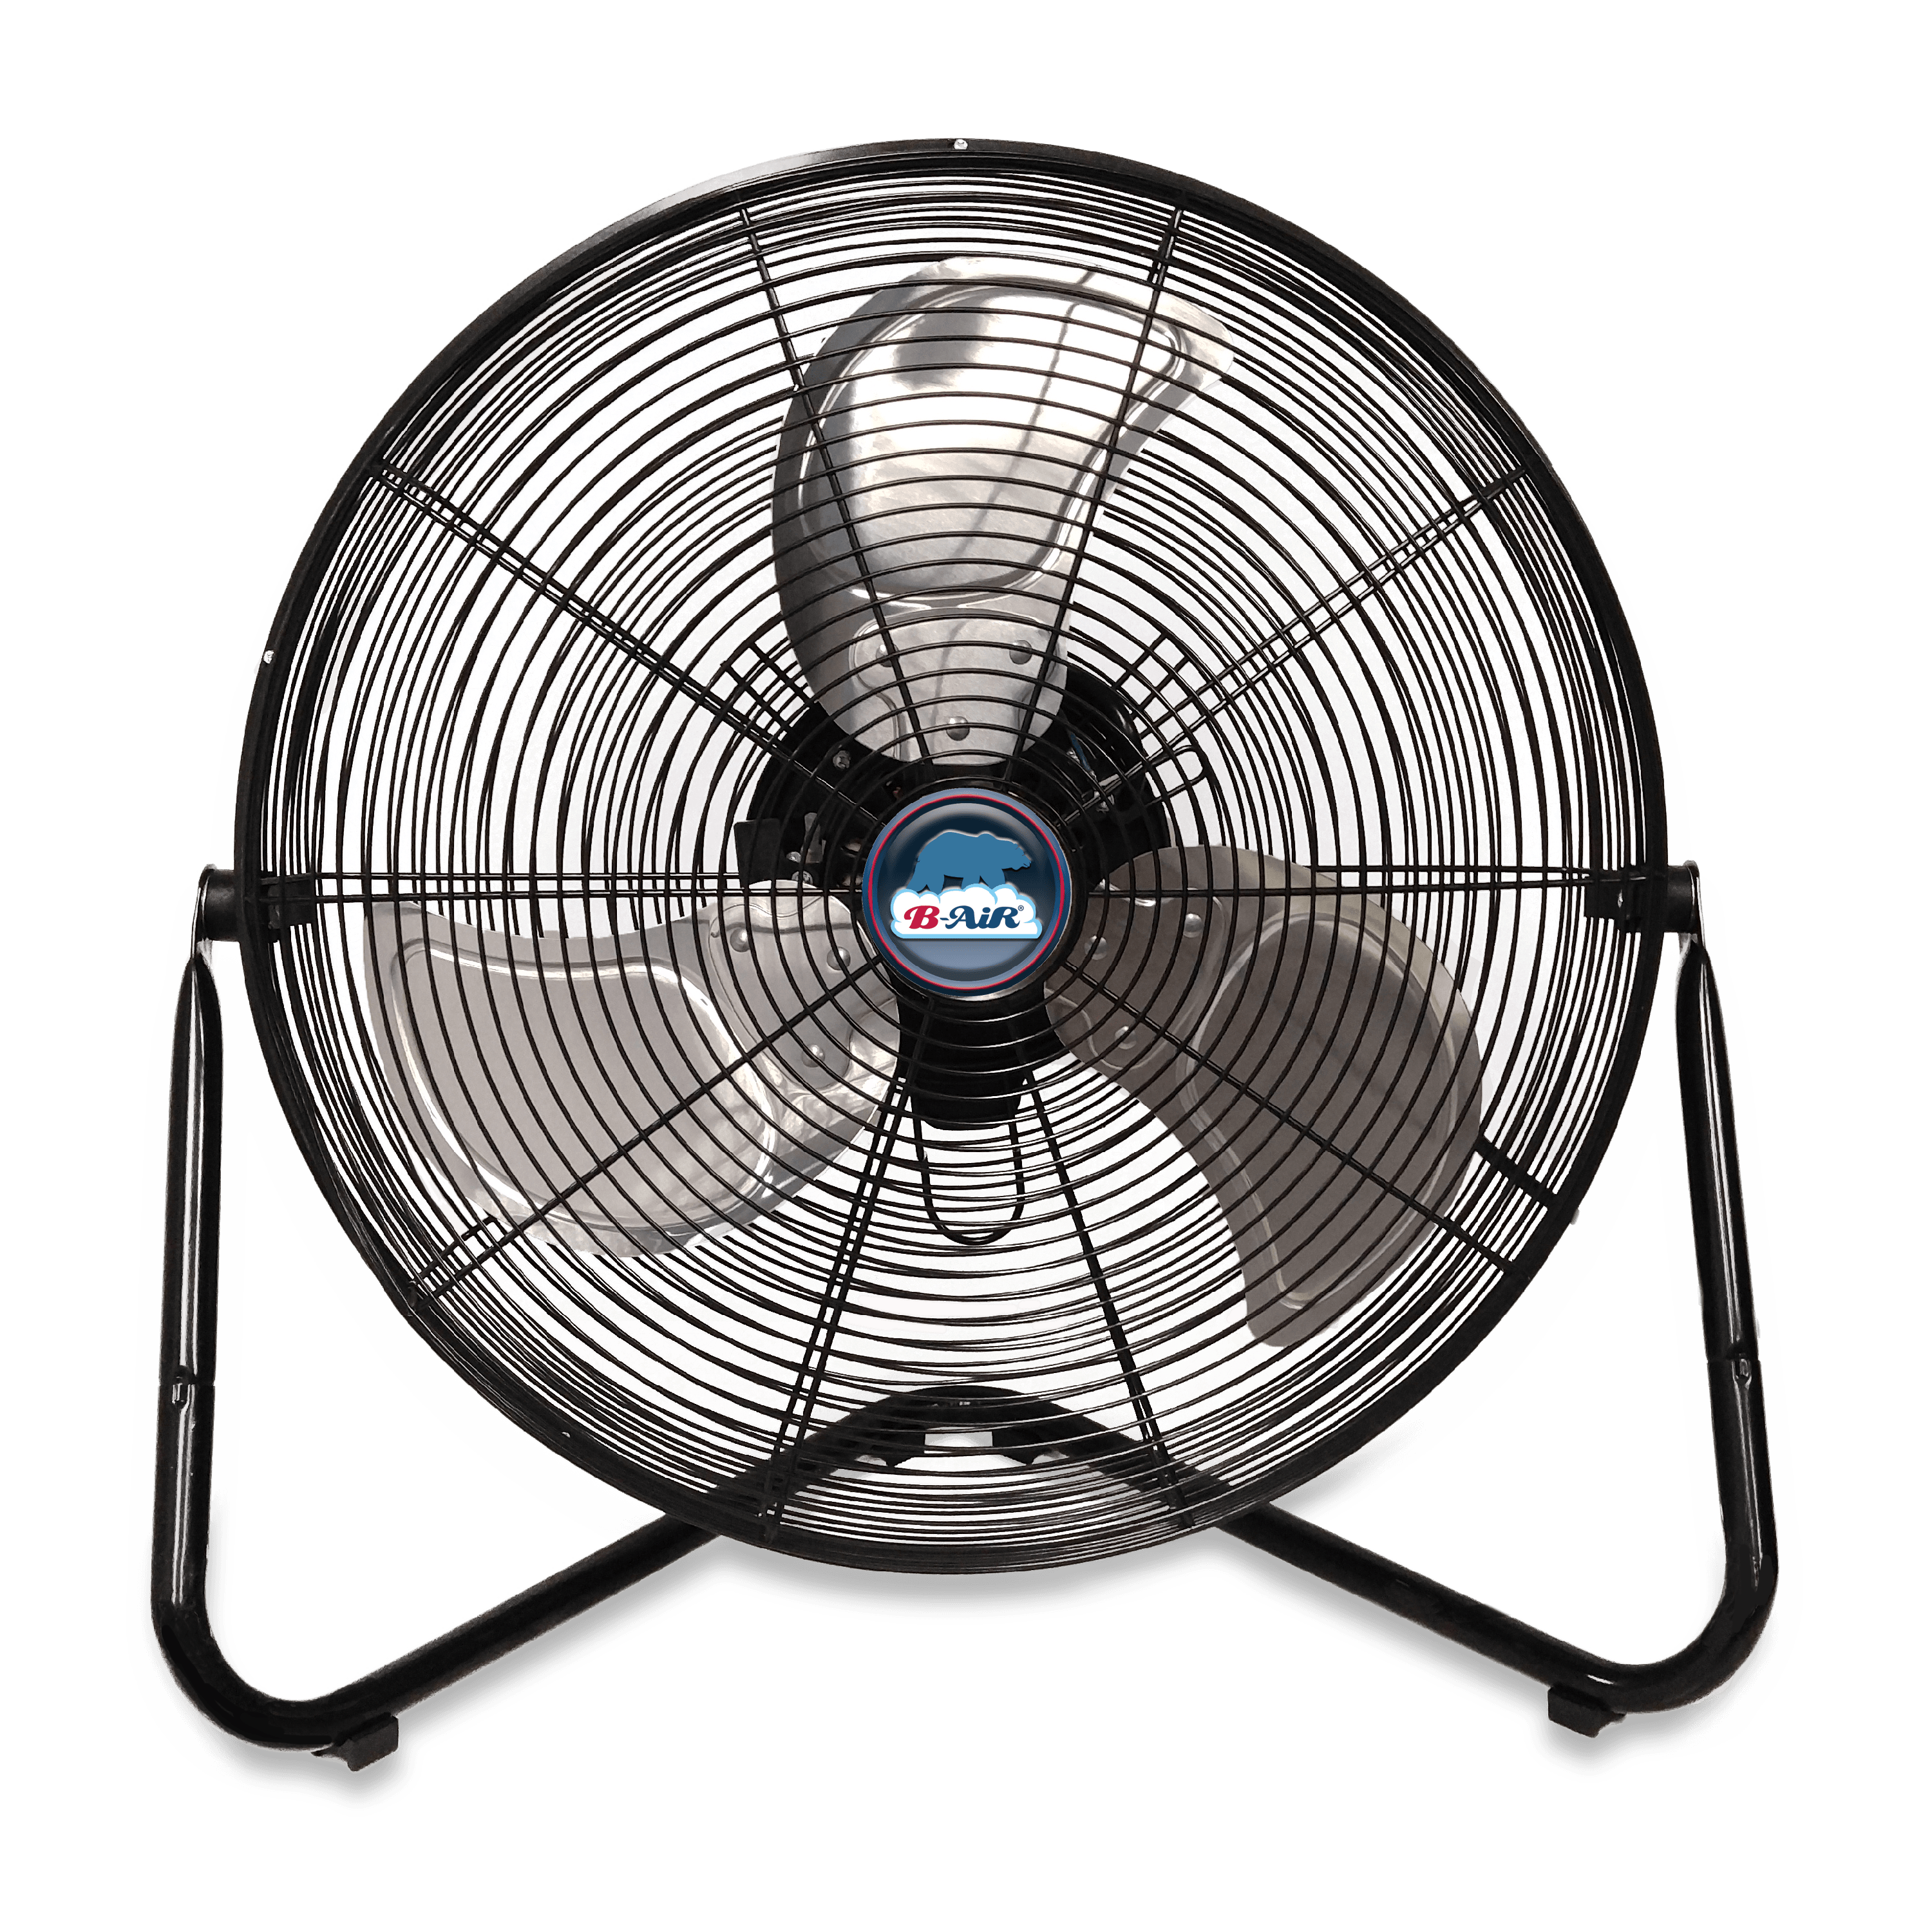 B-Air Firtana-20X High Velocity Floor Fan Electric Industrial Shop and Home Fan, 20" - image 1 of 4